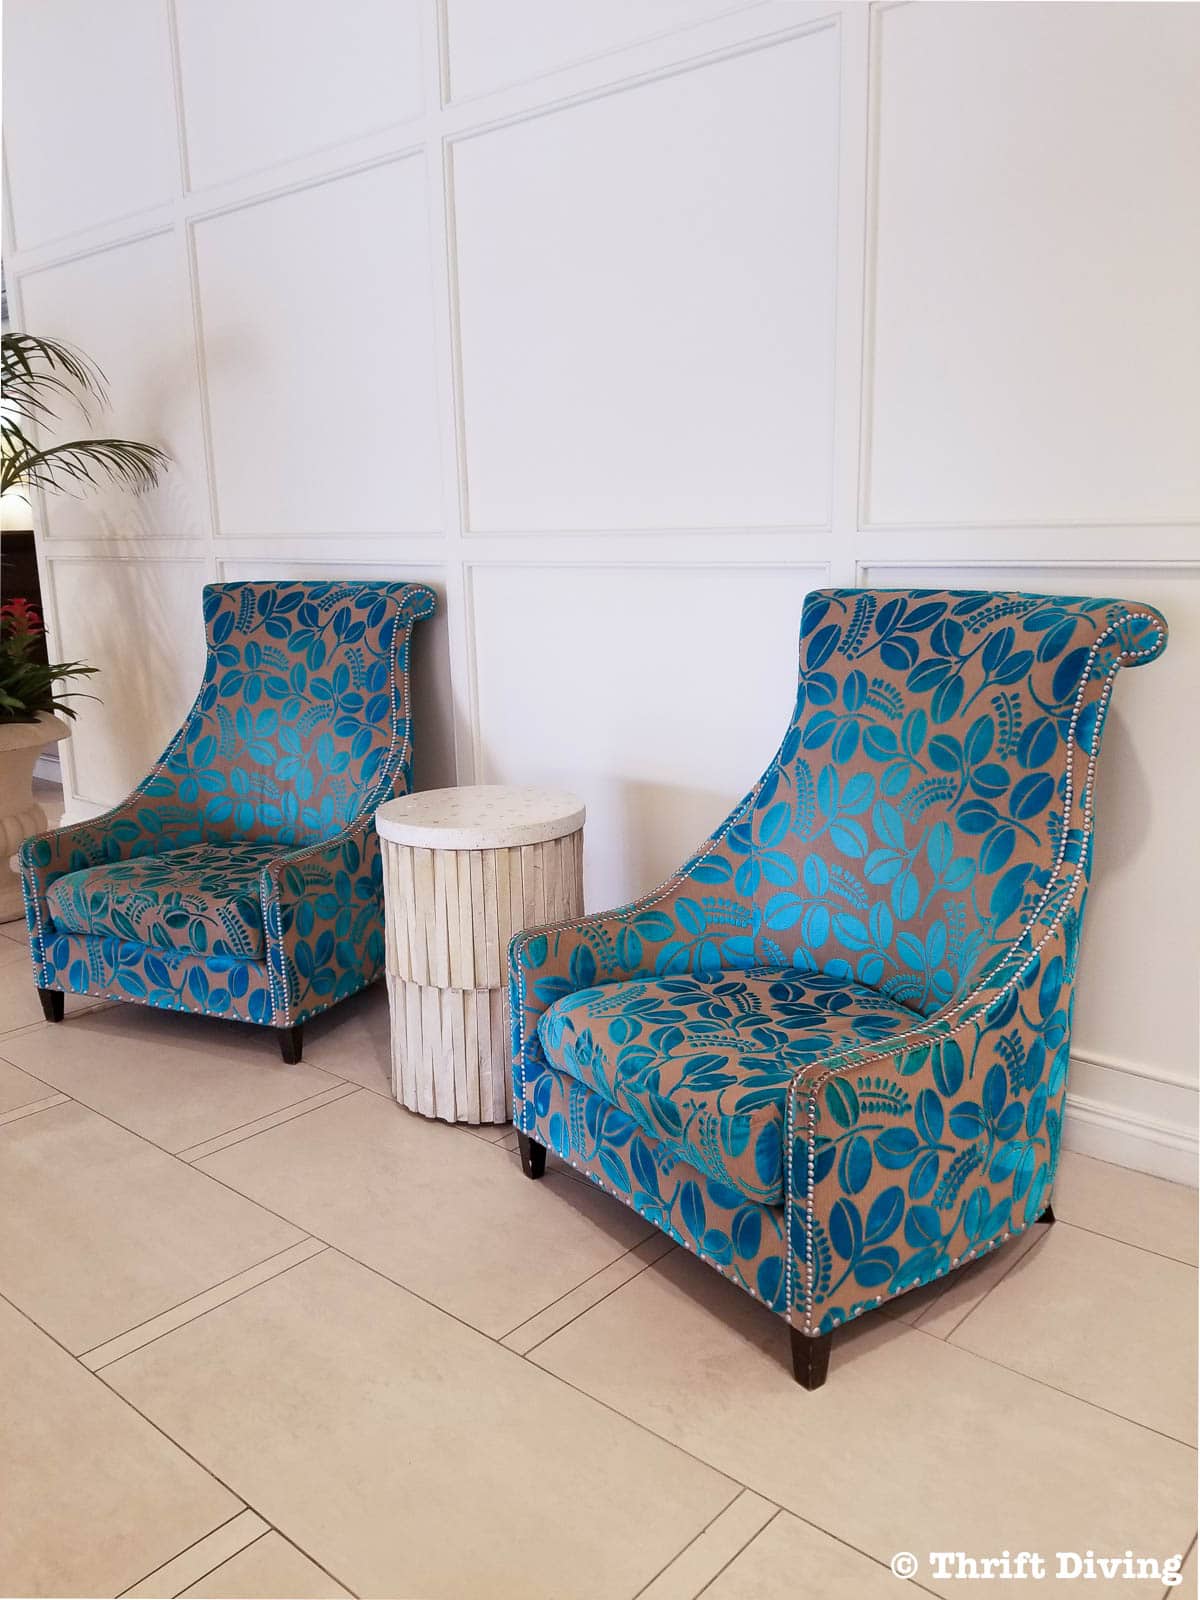 Pretty upholstered teal chairs in hotel lobby - Thrift Diving